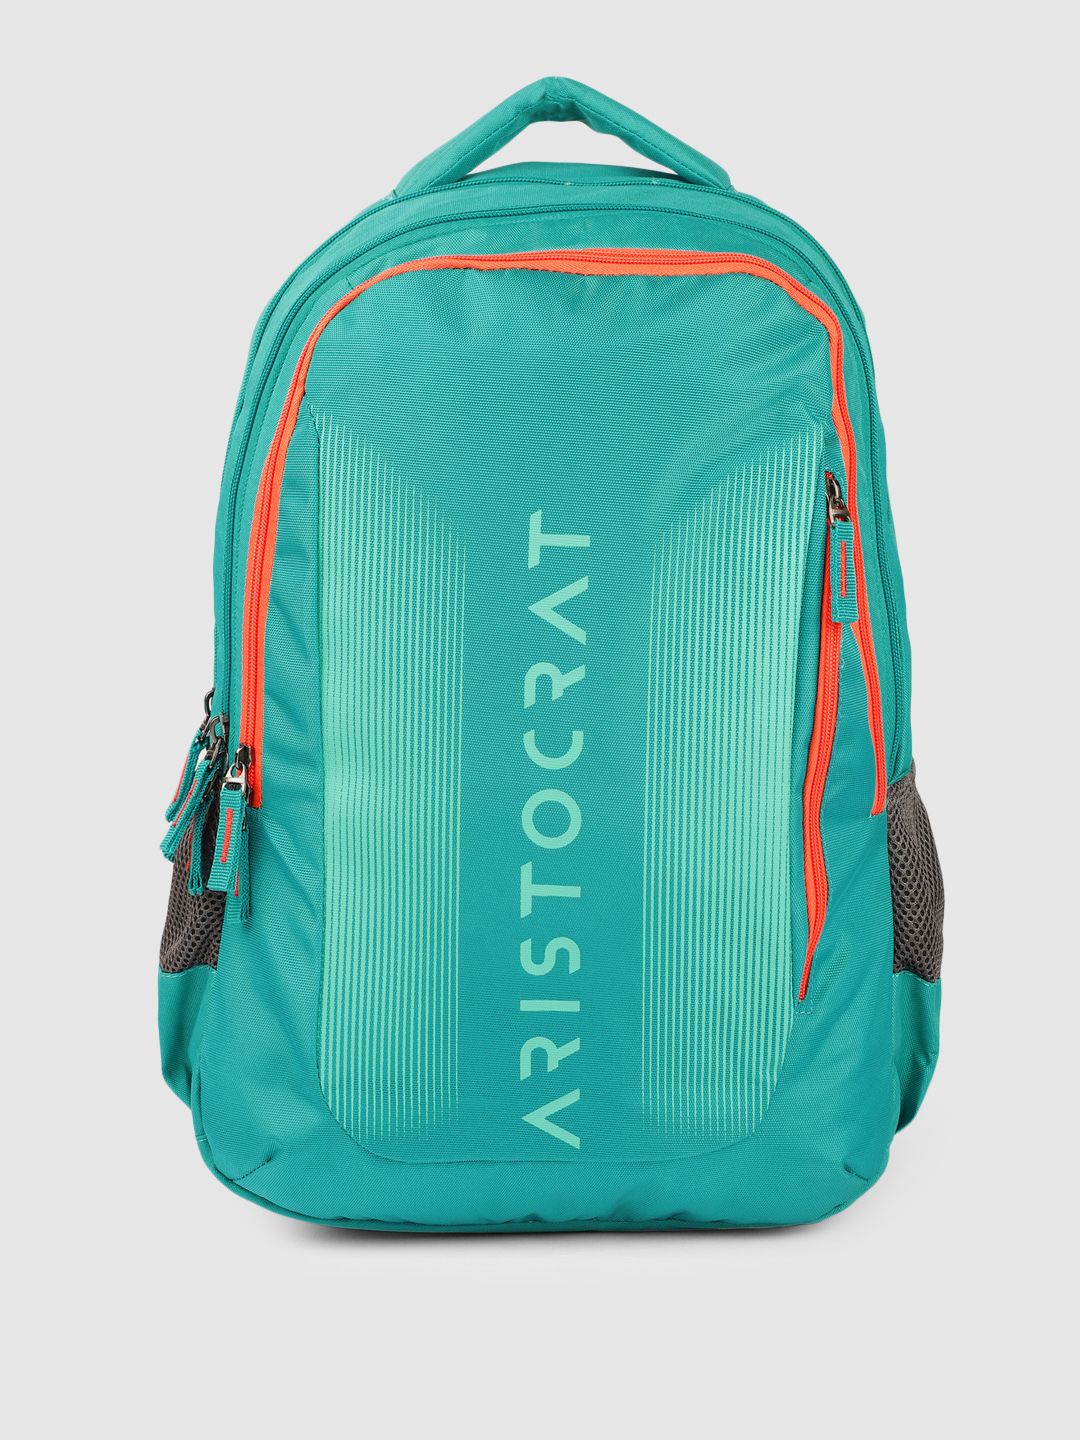 Aristocrat Unisex Teal Blue Brand Logo Backpack Price in India